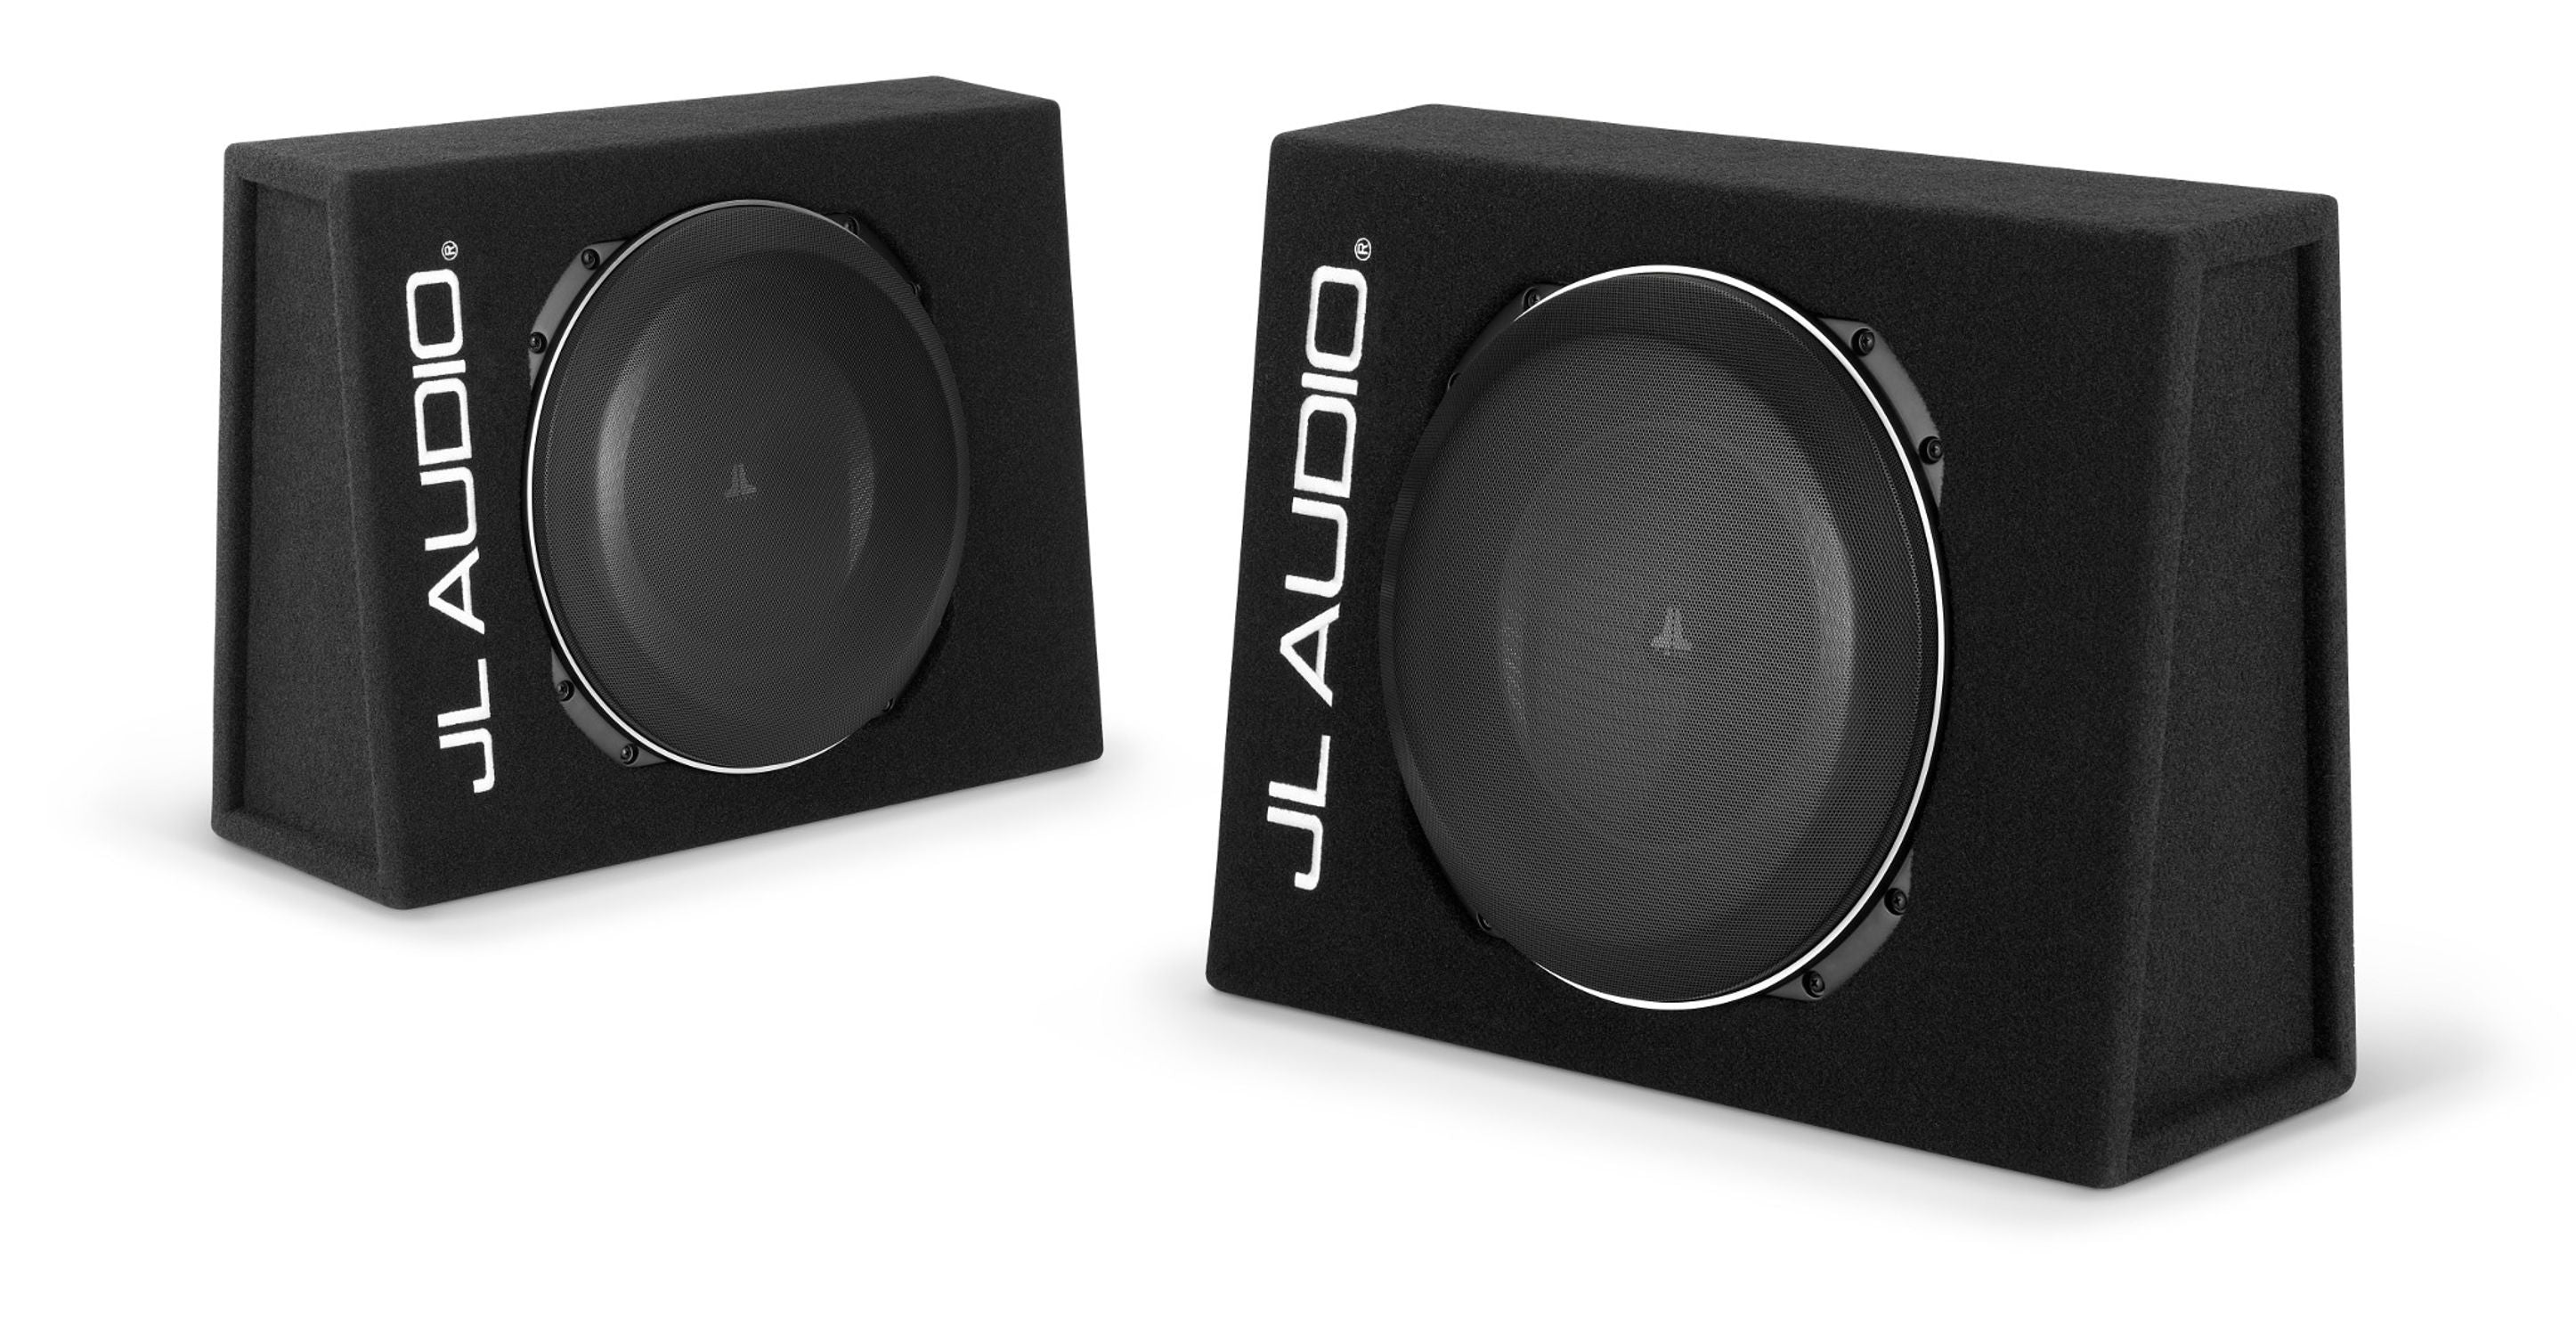 CS113TG-TW5v2 Enclosed Subwoofer Pair Showing Front and Rear